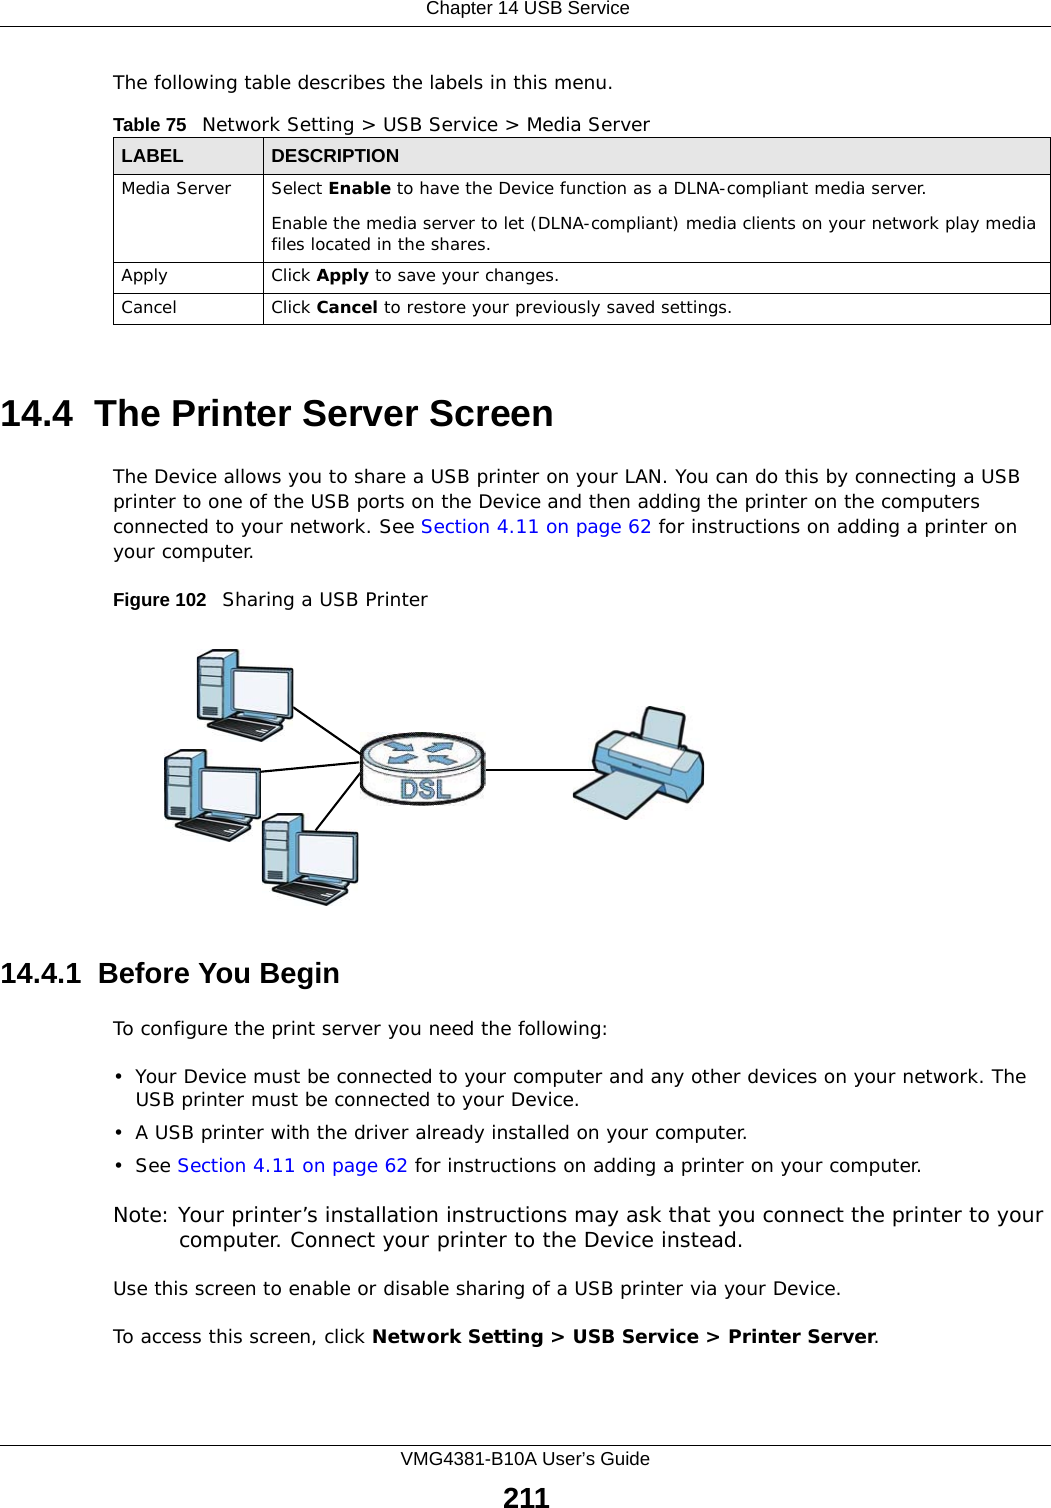  Chapter 14 USB ServiceVMG4381-B10A User’s Guide211The following table describes the labels in this menu.14.4  The Printer Server ScreenThe Device allows you to share a USB printer on your LAN. You can do this by connecting a USB printer to one of the USB ports on the Device and then adding the printer on the computers connected to your network. See Section 4.11 on page 62 for instructions on adding a printer on your computer.Figure 102   Sharing a USB Printer14.4.1  Before You BeginTo configure the print server you need the following:• Your Device must be connected to your computer and any other devices on your network. The USB printer must be connected to your Device.• A USB printer with the driver already installed on your computer.•See Section 4.11 on page 62 for instructions on adding a printer on your computer. Note: Your printer’s installation instructions may ask that you connect the printer to your computer. Connect your printer to the Device instead.Use this screen to enable or disable sharing of a USB printer via your Device. To access this screen, click Network Setting &gt; USB Service &gt; Printer Server.Table 75   Network Setting &gt; USB Service &gt; Media ServerLABEL DESCRIPTIONMedia Server Select Enable to have the Device function as a DLNA-compliant media server.Enable the media server to let (DLNA-compliant) media clients on your network play media files located in the shares. Apply Click Apply to save your changes.Cancel Click Cancel to restore your previously saved settings.